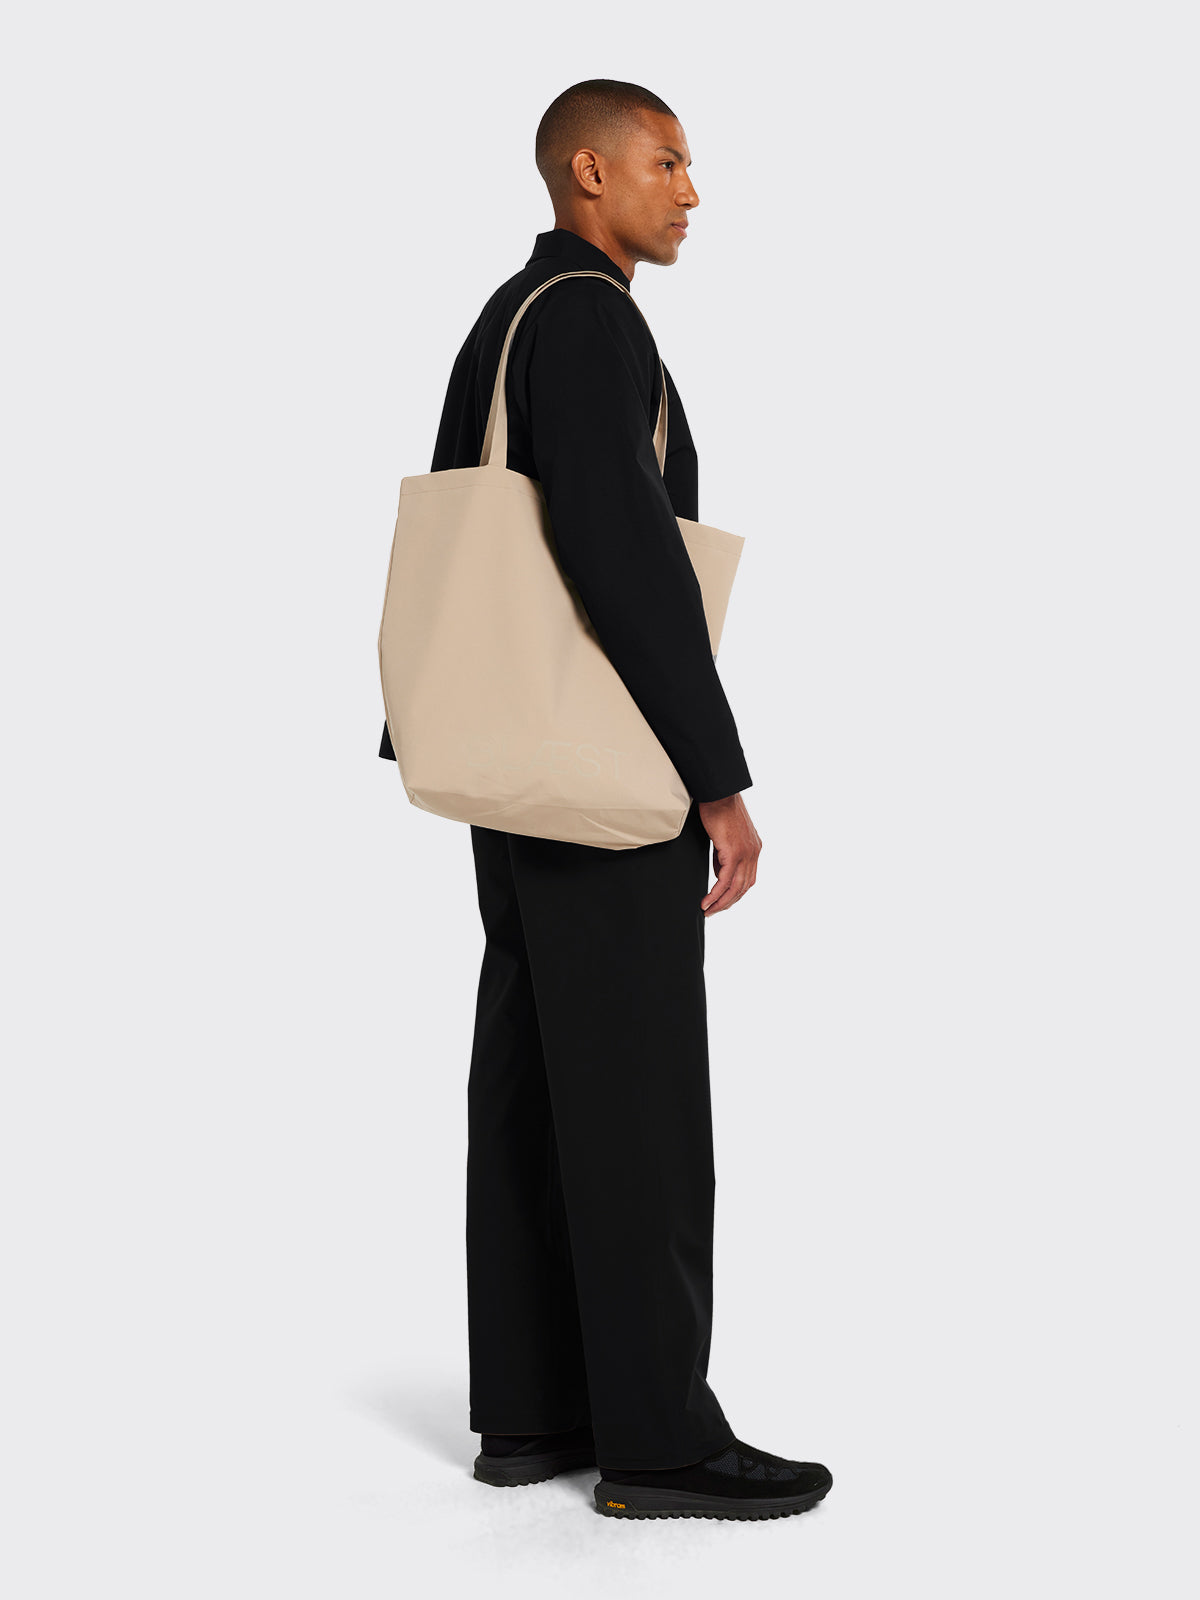 Model with Moa tote bag in Beige from Blæst